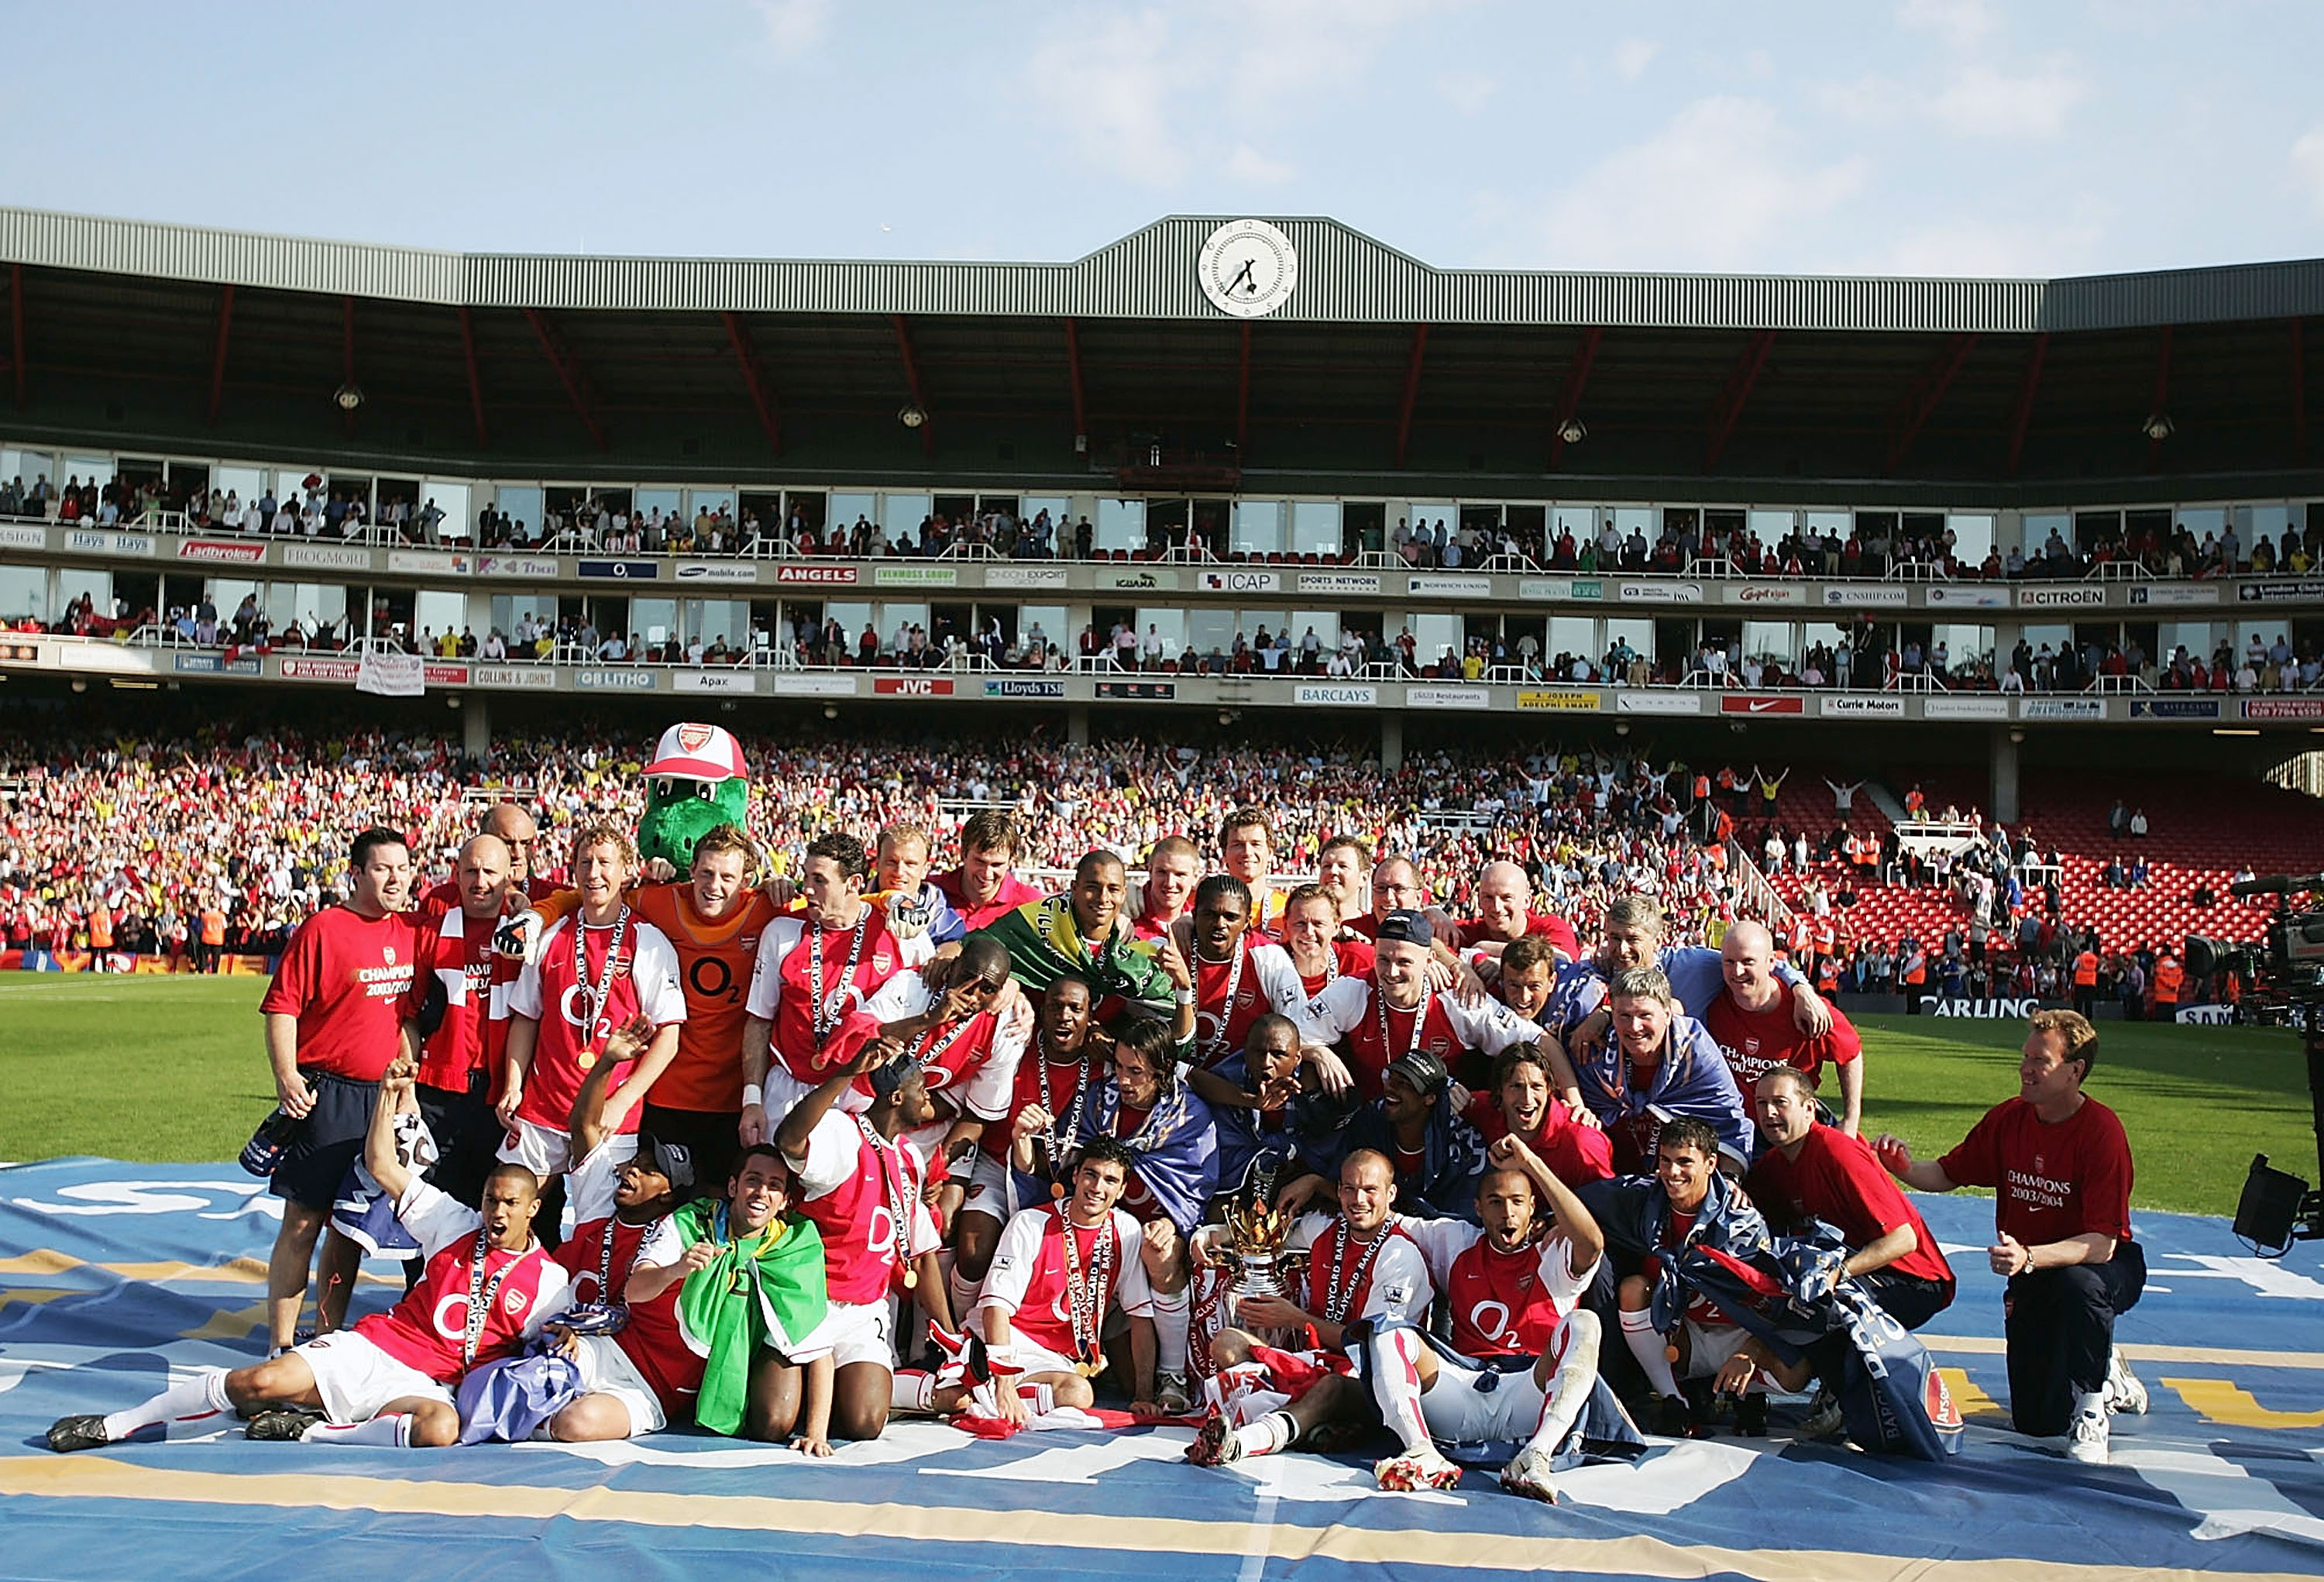 LONDON - MAY 15:  Arsenals players celebrate winning the Premiership during the FA Barclaycard Premiership match between Arsenal and Leicester City at Highbury on May 15, 2004 in London.  (Photo by Clive Mason/Getty Images)